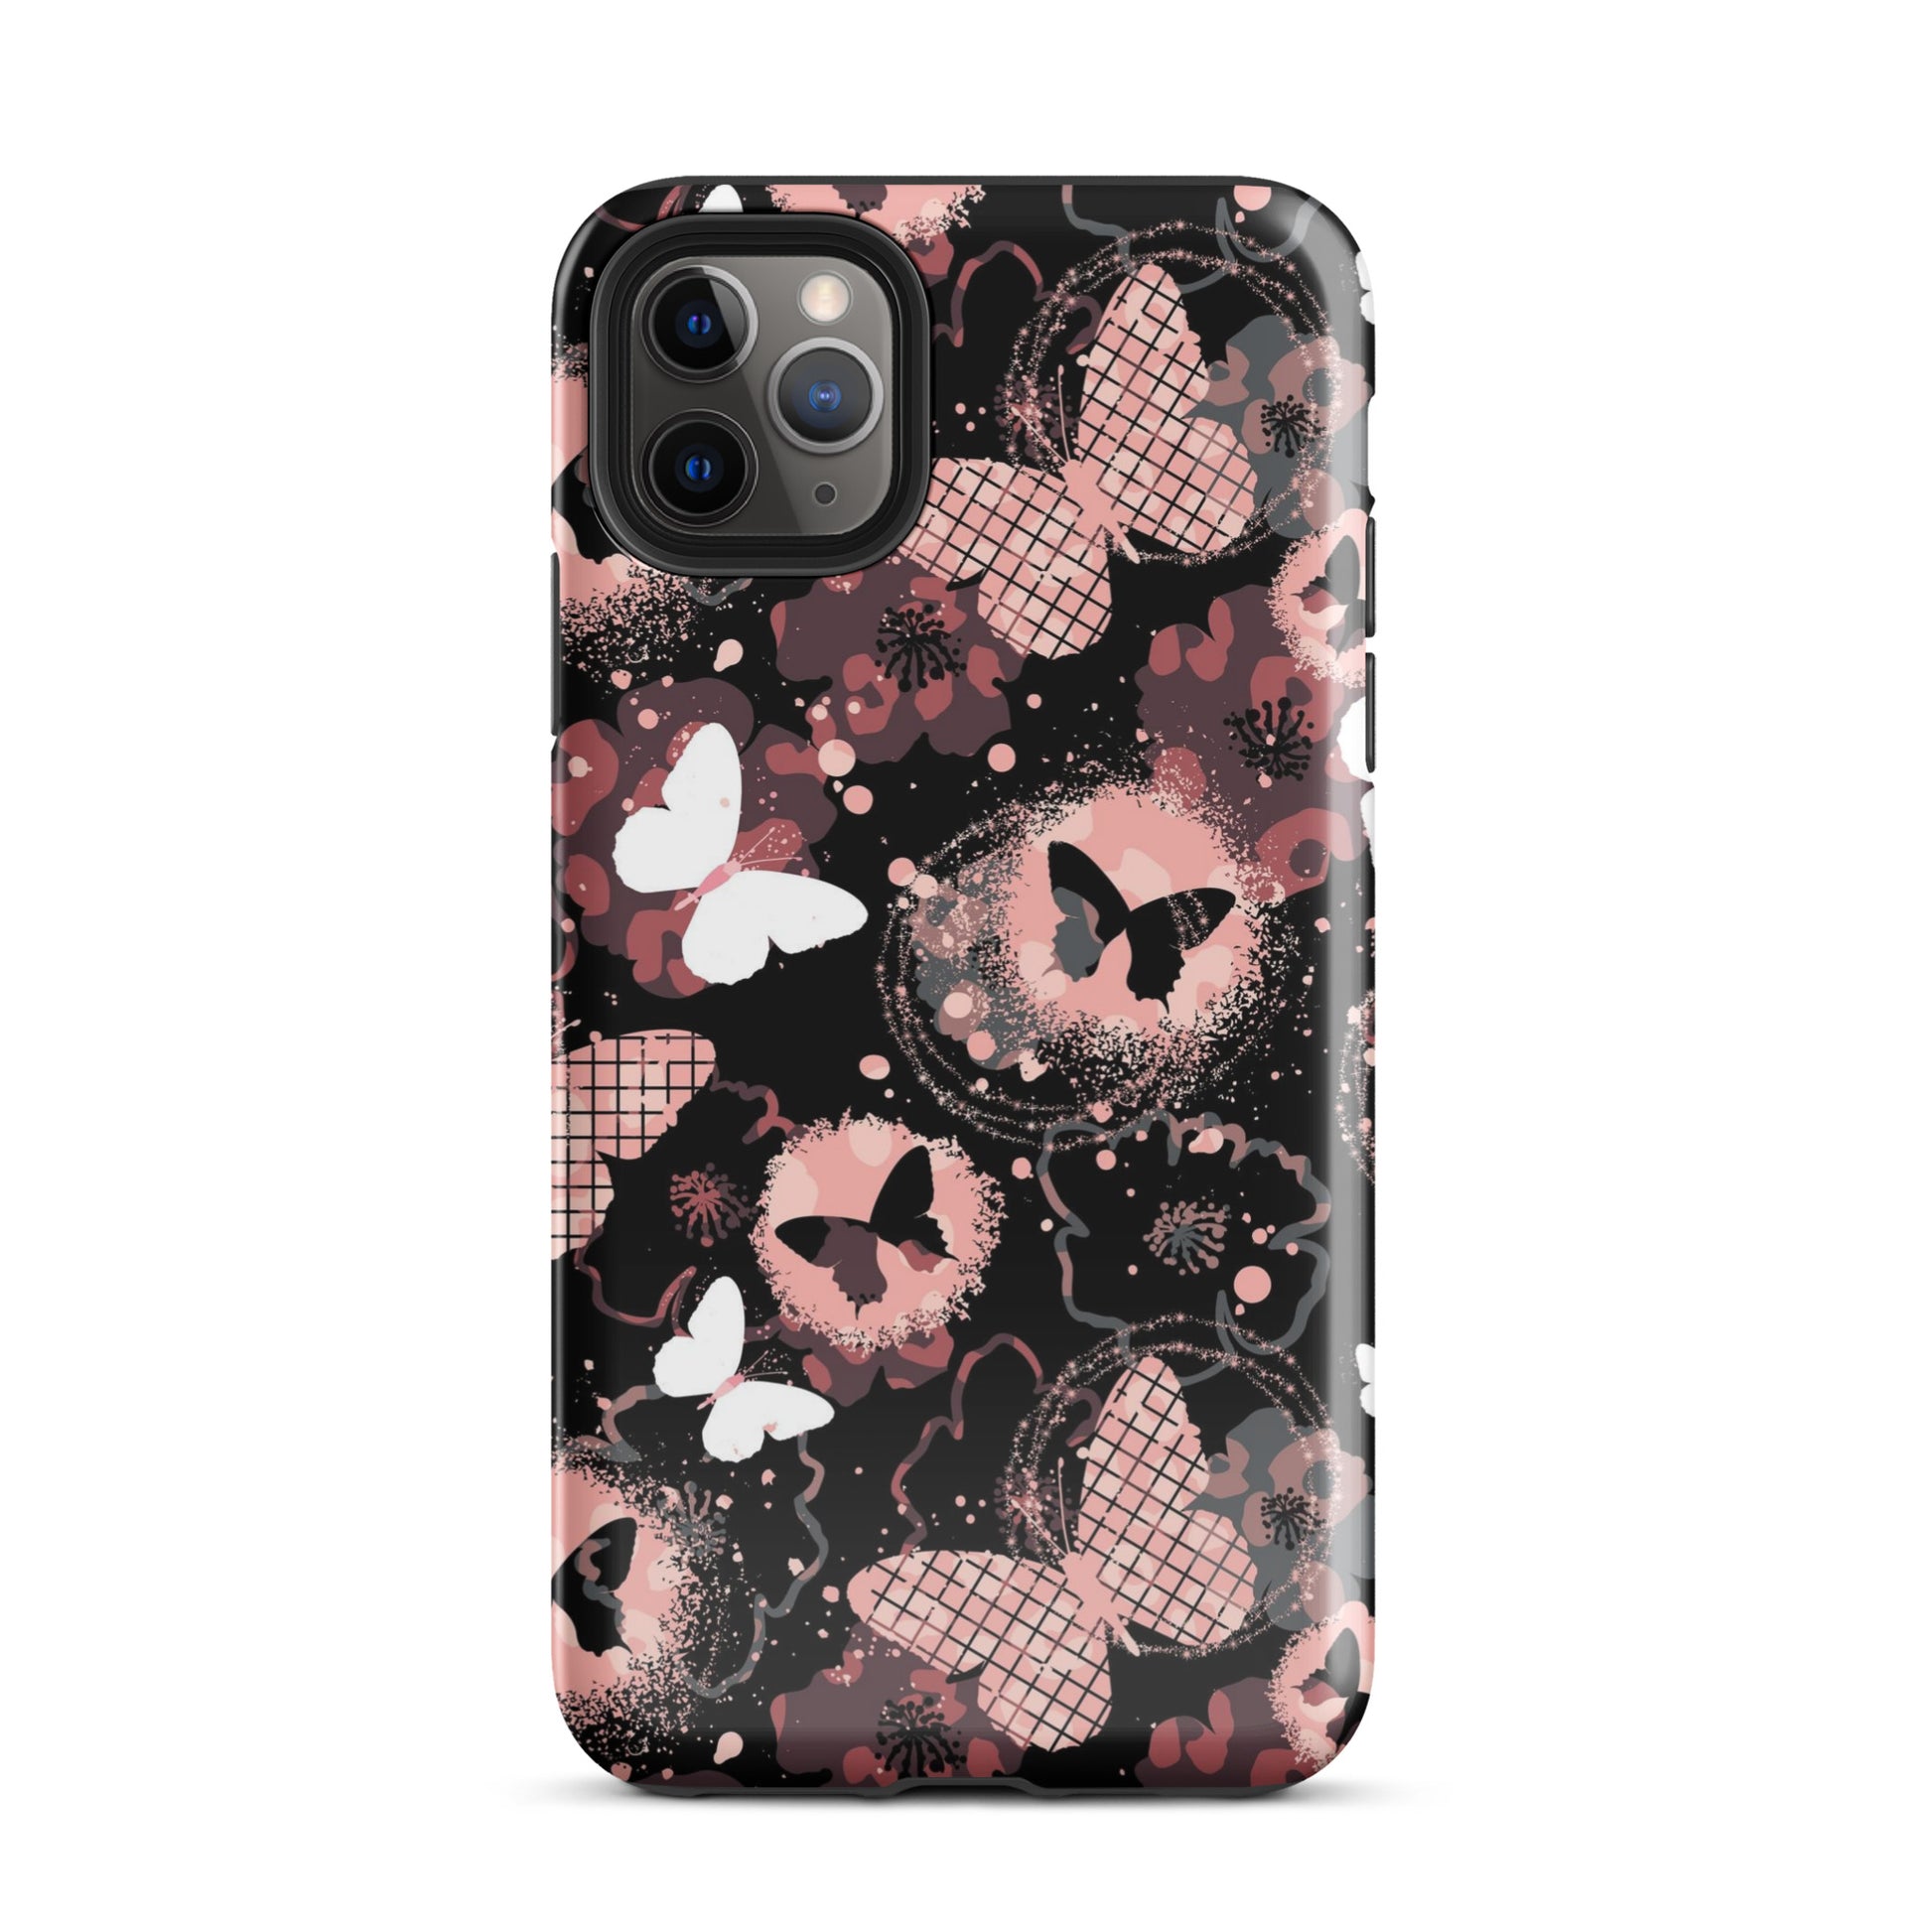 Butterfly Energy iPhone Case Glossy iPhone 11 Pro Max